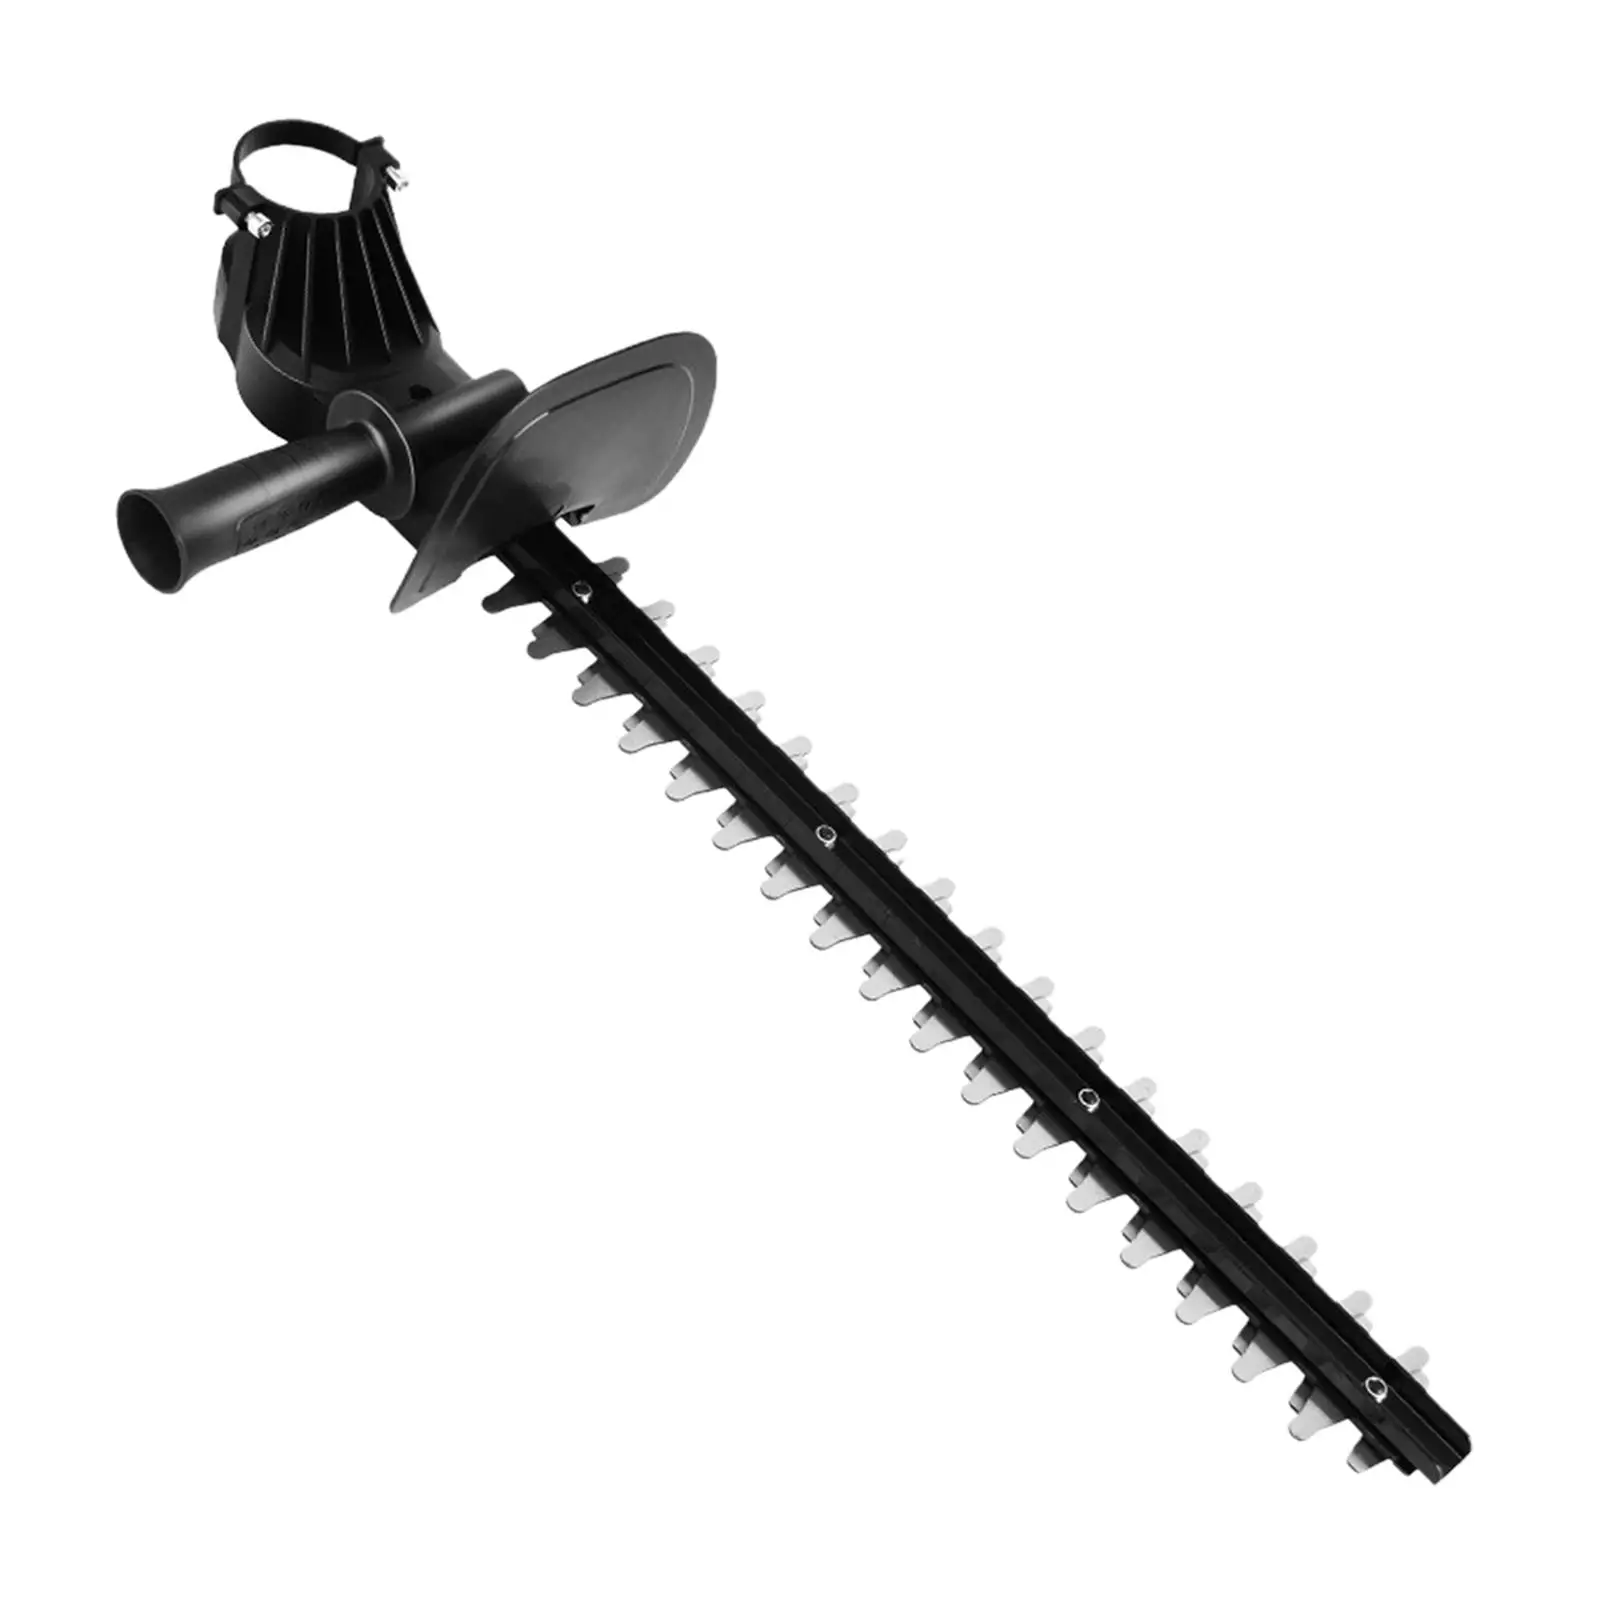 Replacement Wear Resistant 45.5cm Blade Length for Flat or Spherical Pruning Garden Modeling Tea Garden Picking Small Branches